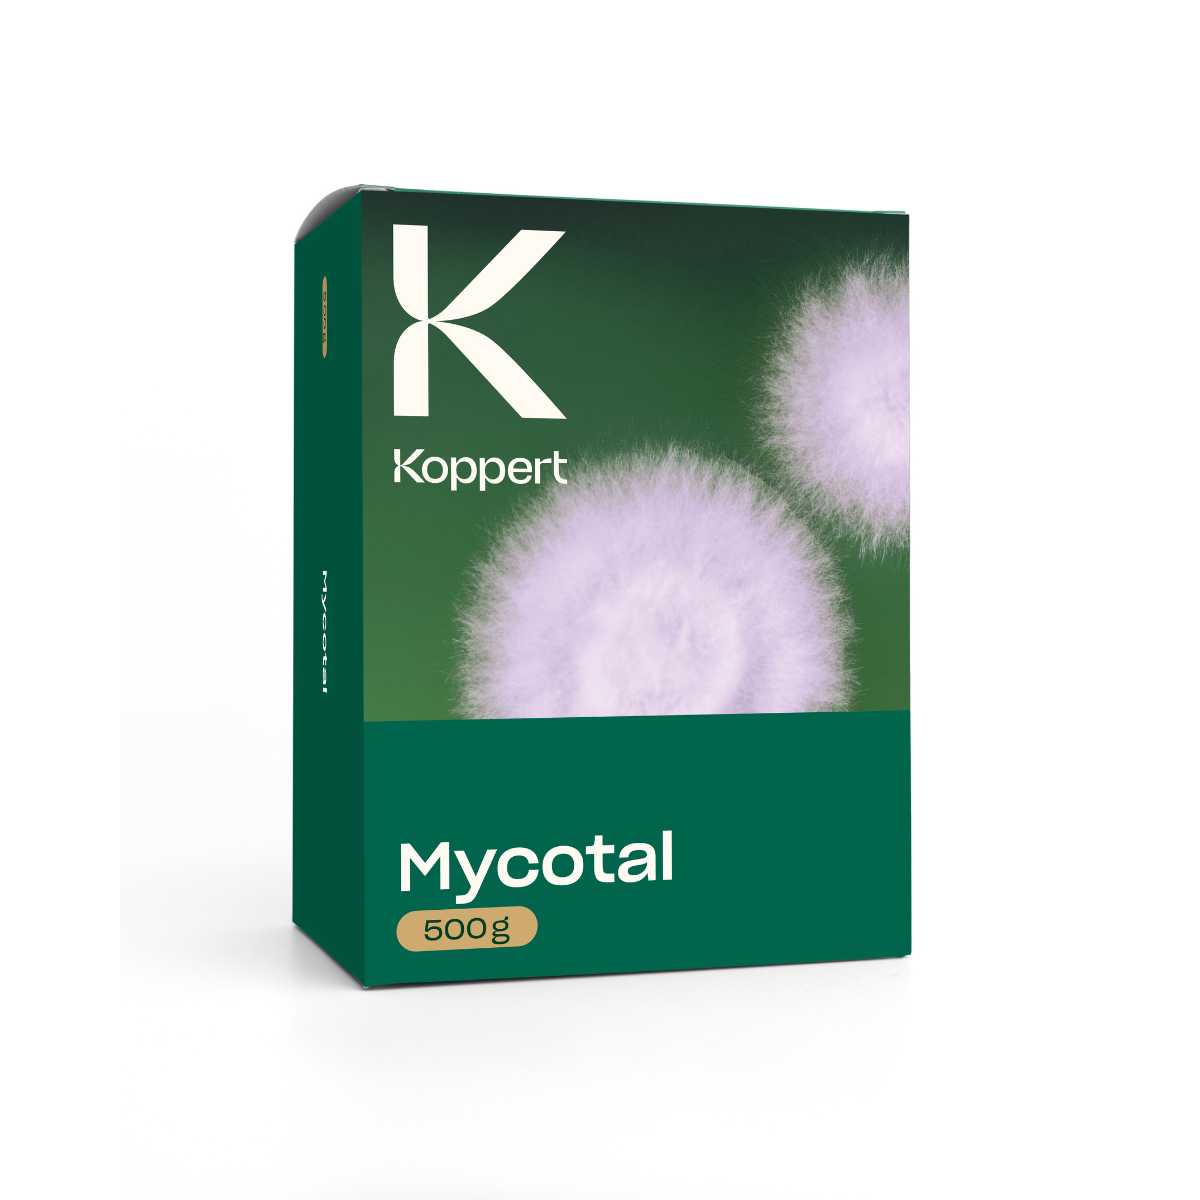 Mycotal Product by Koppert